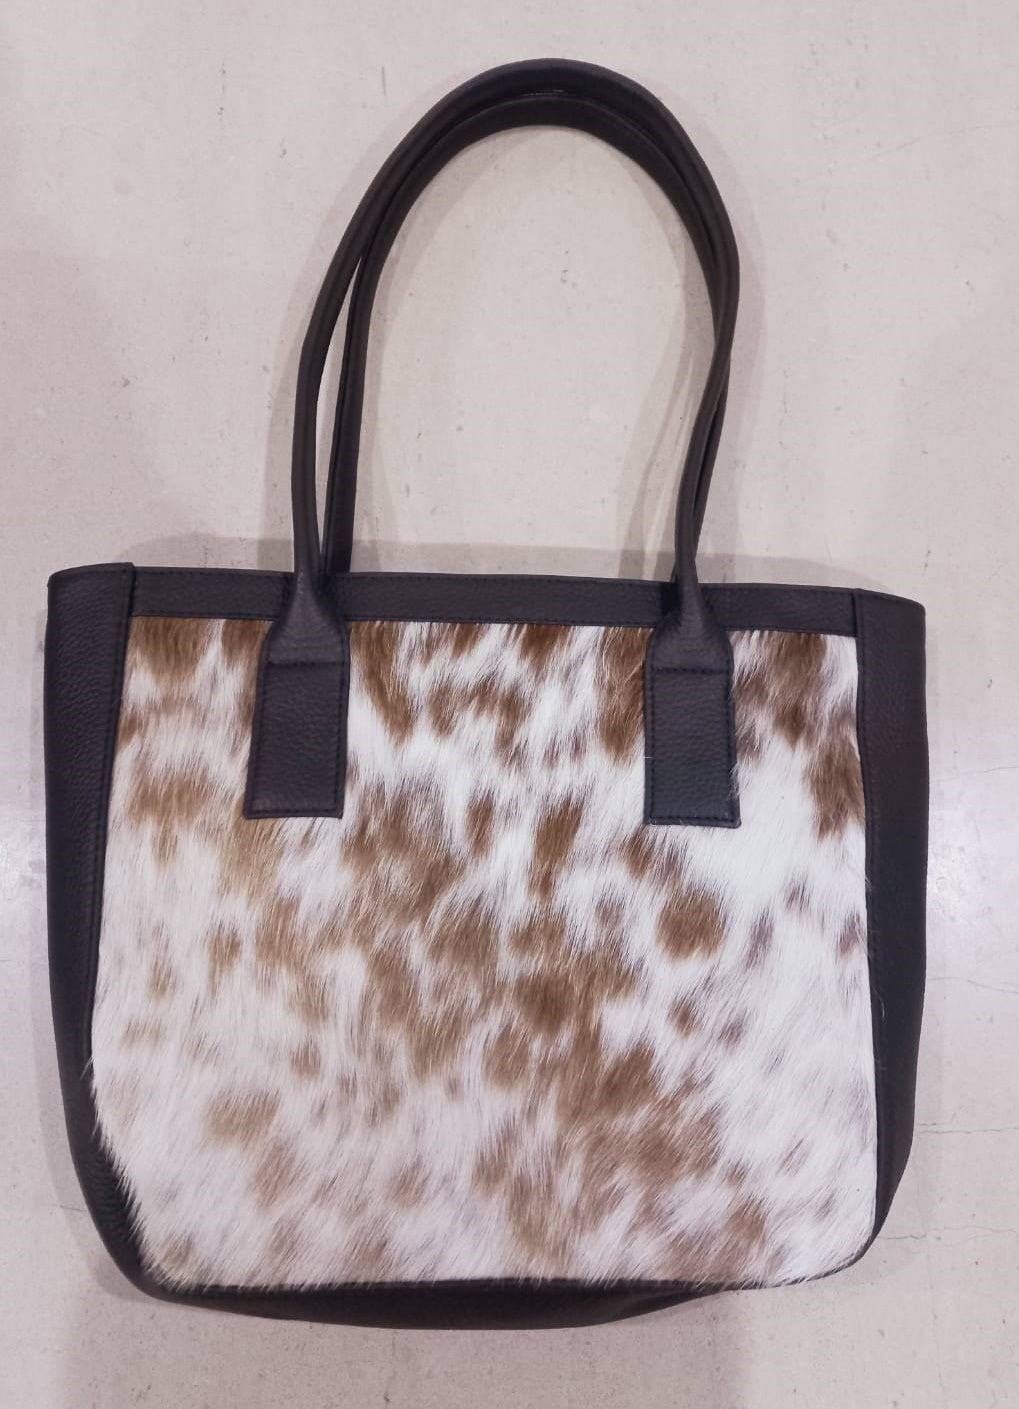 cowhide bag cowhide purse cowhide leather shoulder bag women's handbag stylish totes light weighted totes clearance sale gift for her cheap tote bags gift for women